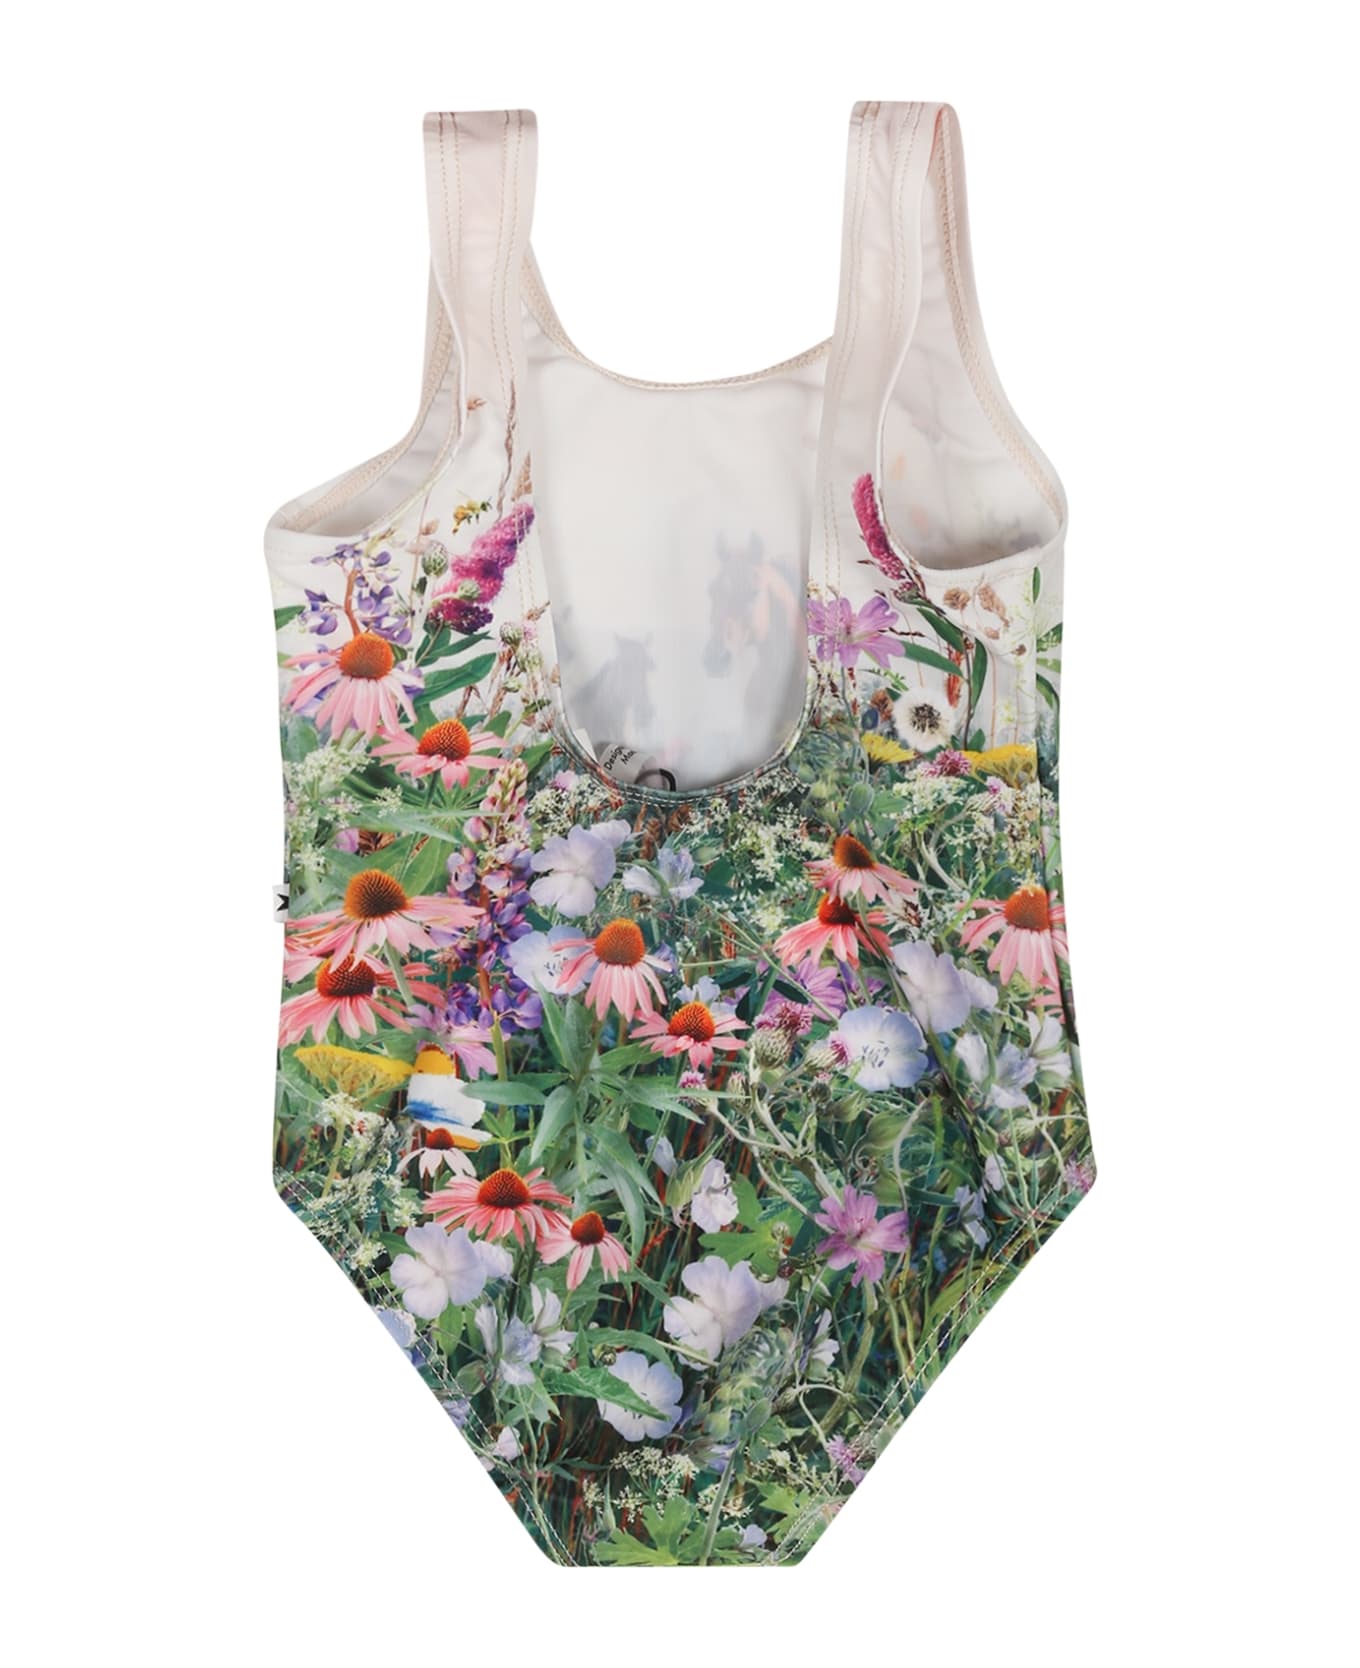 Molo Ivory Swimsuit For Baby Girl With Horses And Flowers Print - Ivory 水着